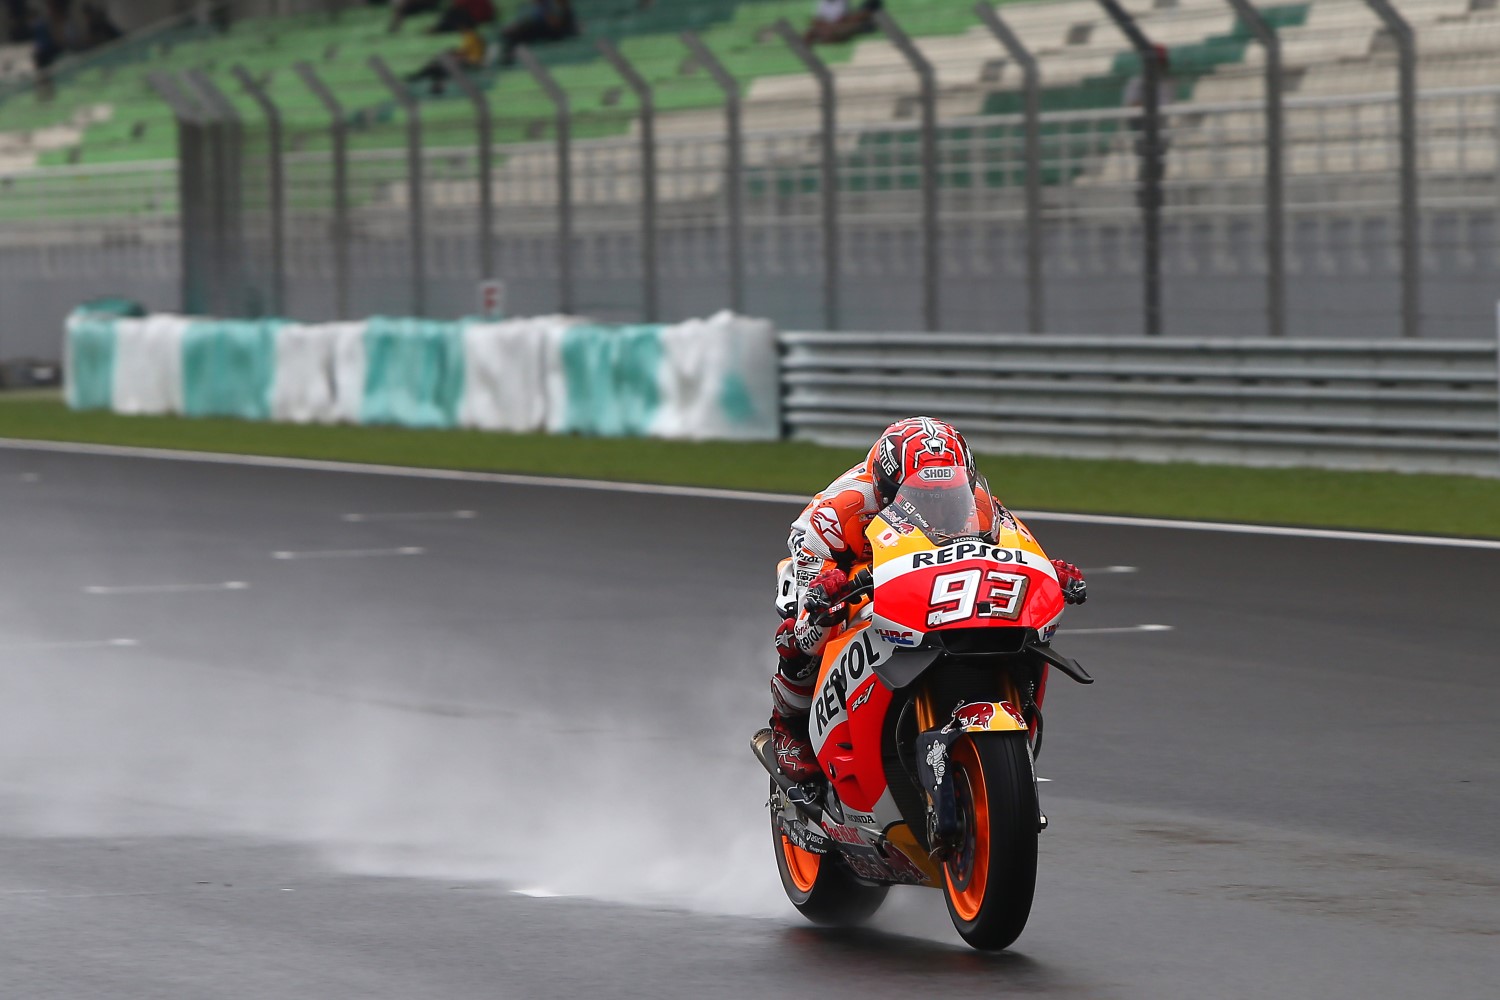 Marquez in the wet qualifying session